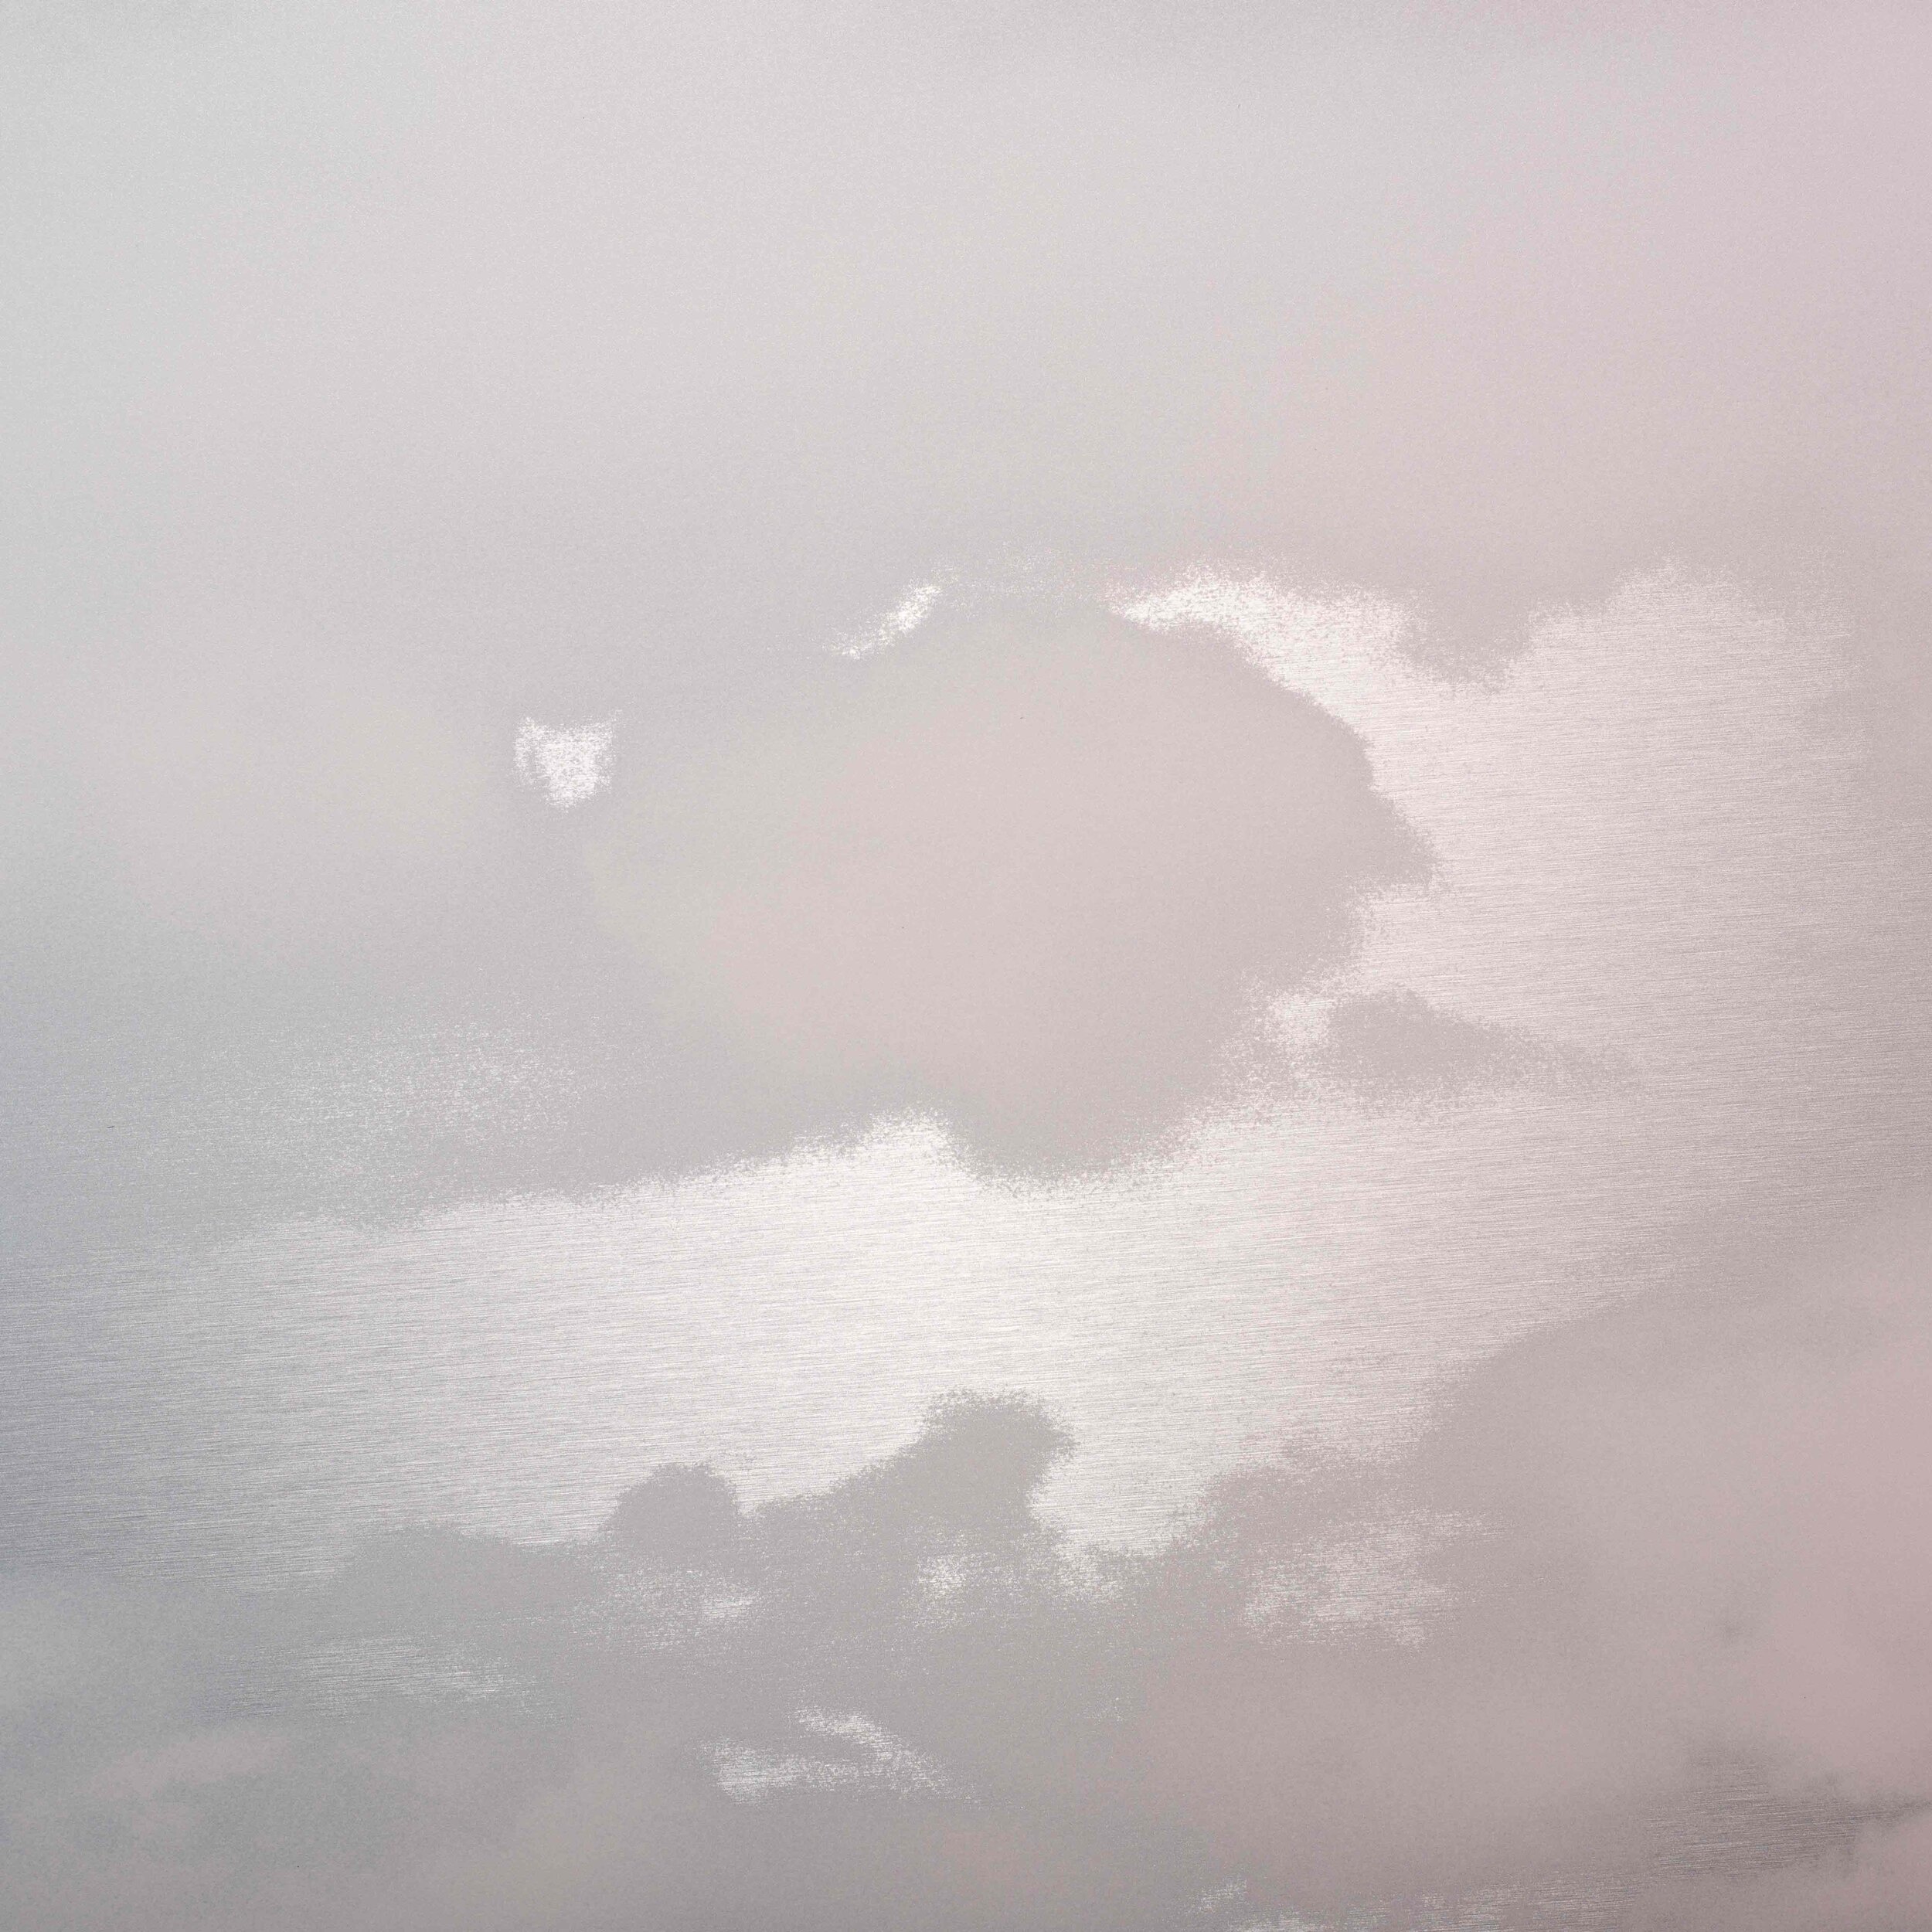 UNKAI (SEA OF CLOUDS) MAY 22 2021 5-47 AM NYC, 2021 Ink On Aluminum Composite 48 x 1 in (121.92 x 2.54 cm) Miya Ando 6.jpg